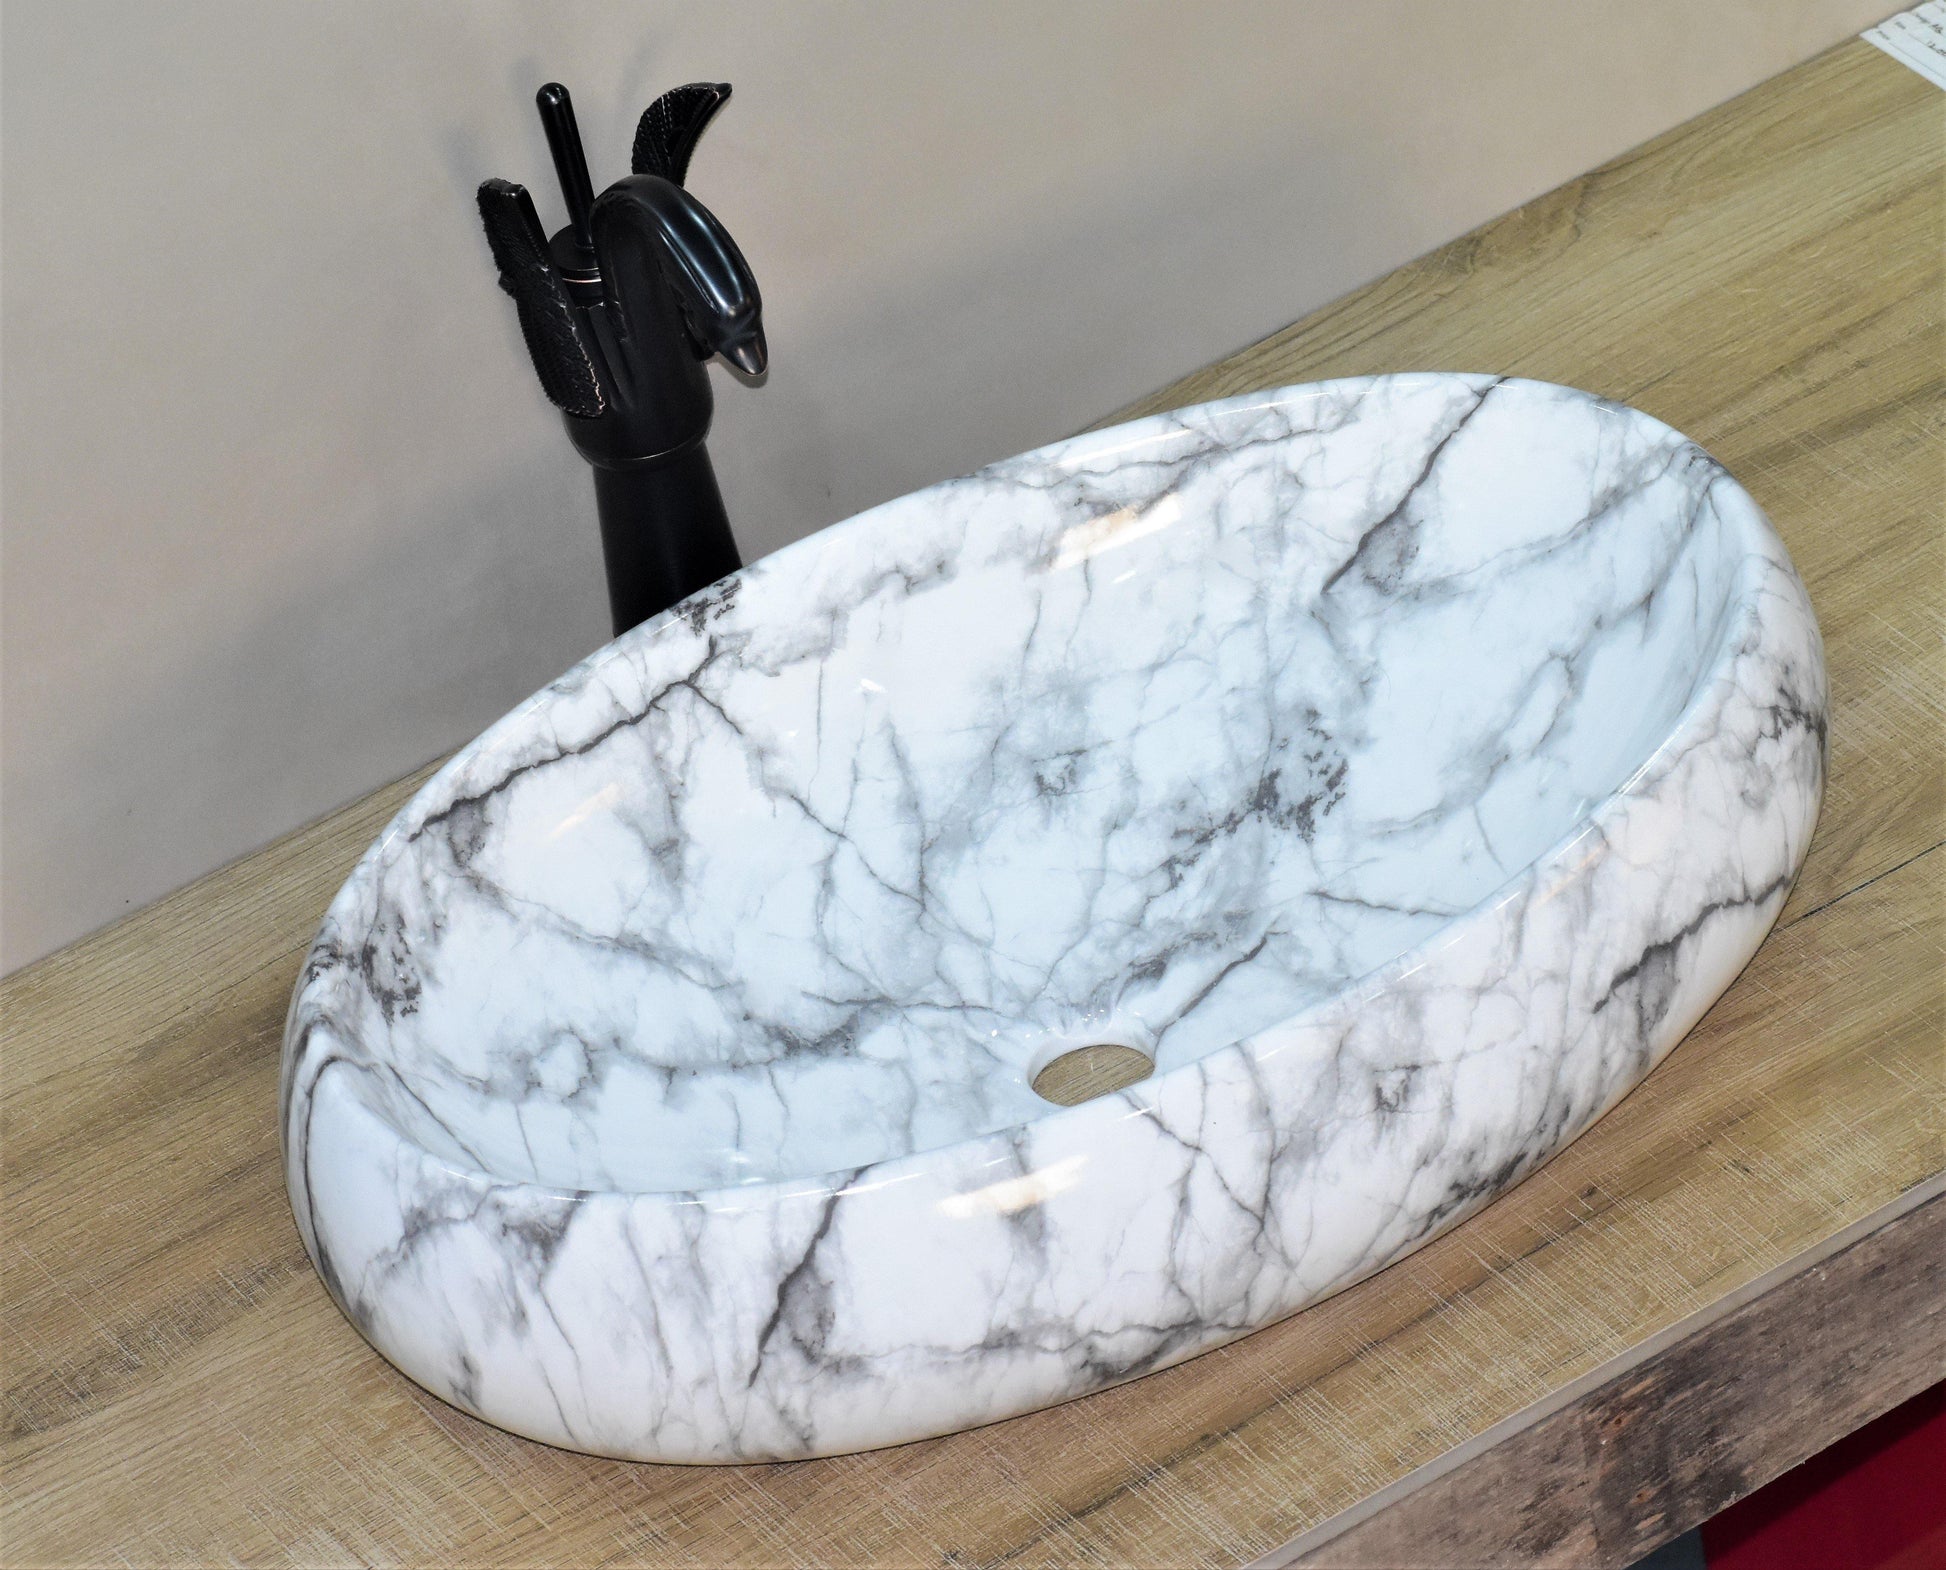 Ceramic Premium Designer Table Top Over Counter Vessel Sink Wash Basin for Bathroom 23 x 15 x 6 Inch Oval Shape in White Color Marble Pattern - Bath Outlet